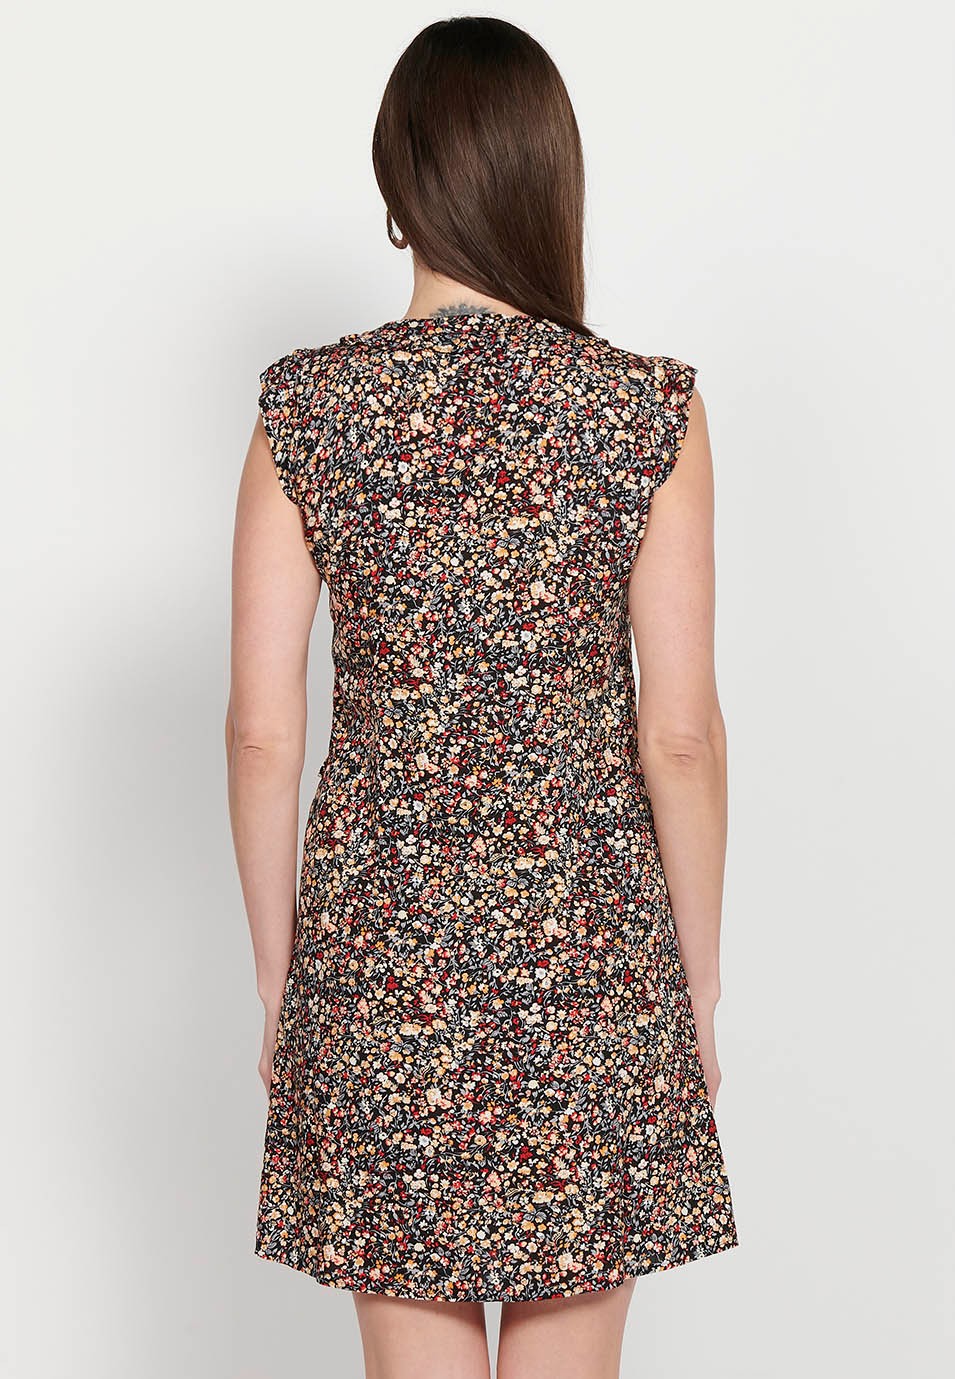 Short sleeveless dress with ruffle detail on the shoulders with V-neckline and Multicolor floral print for Women 6